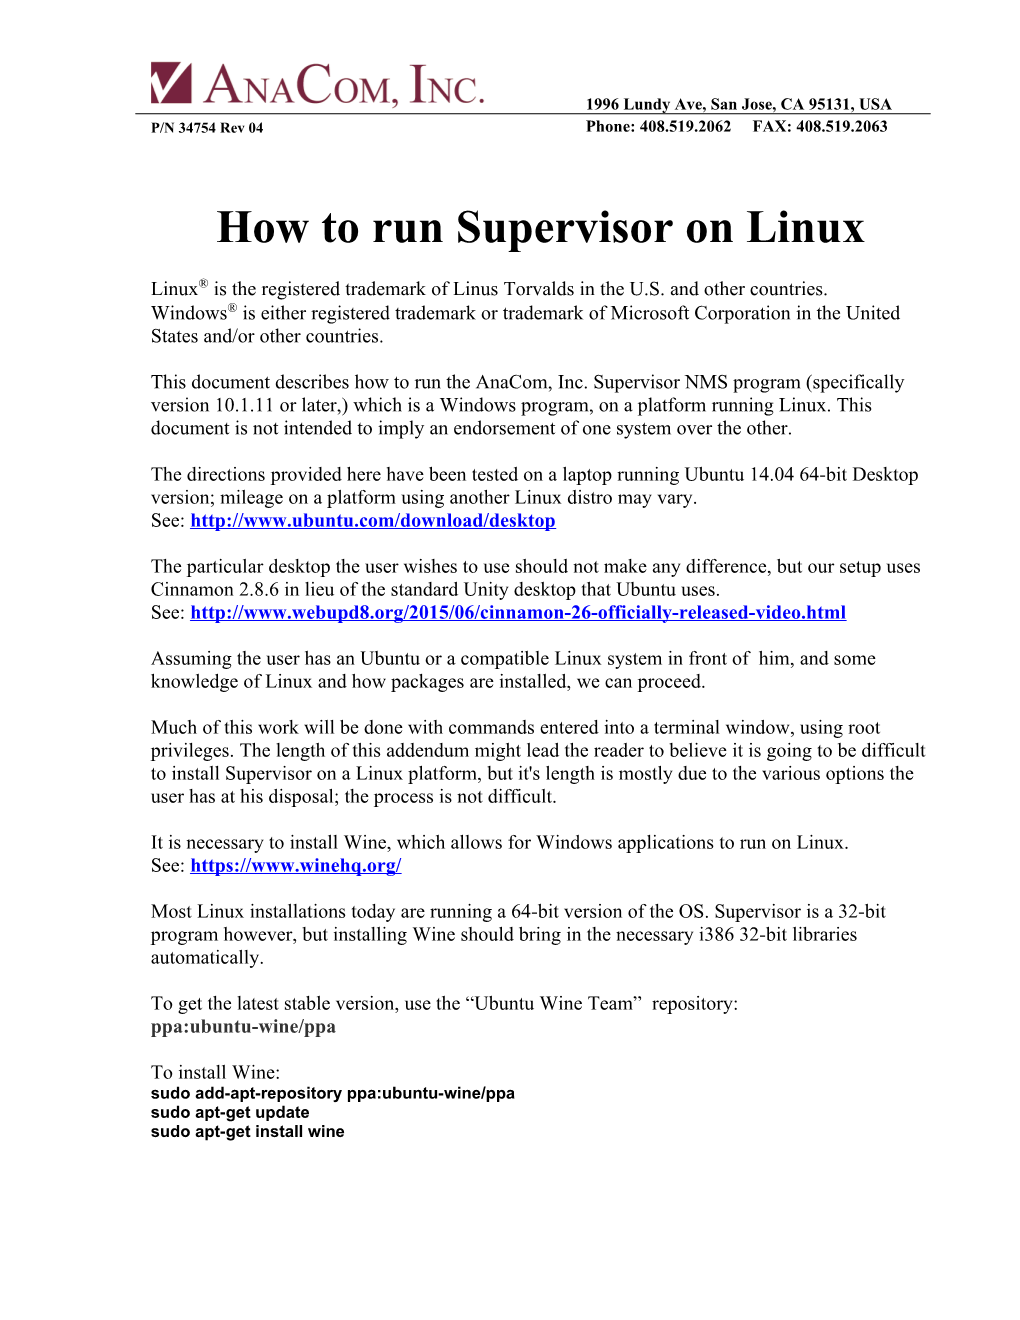 How to Run Supervisor on Linux